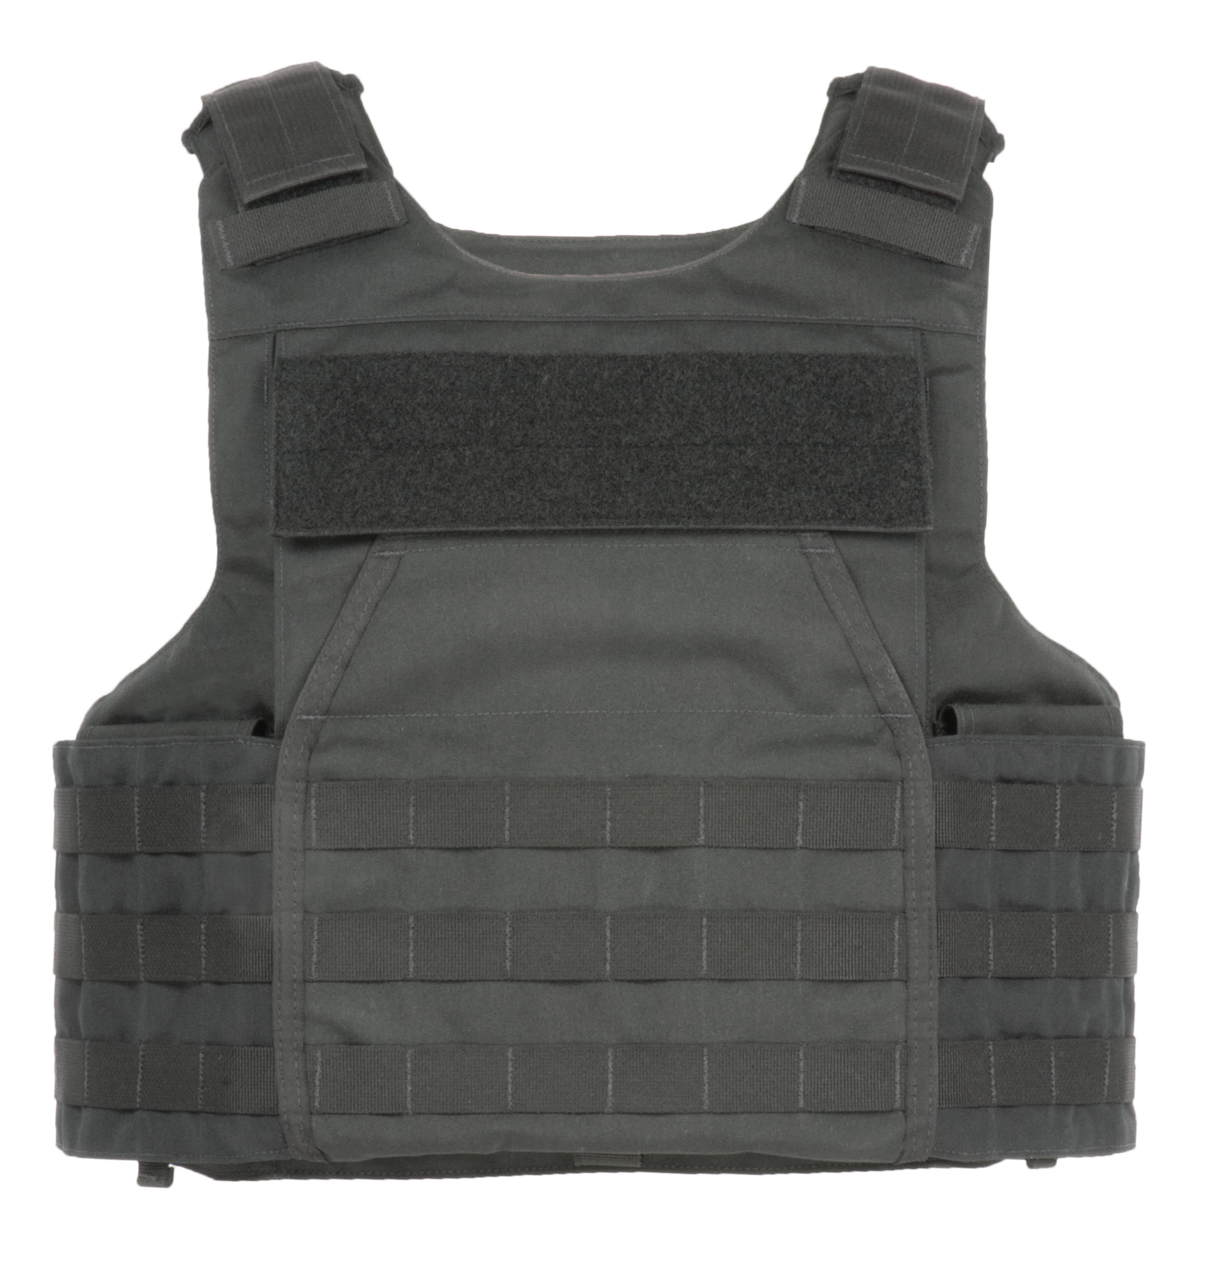 Armor Express Hard Core FE Men's Overt Ballistic Body Armor Carrier, With front interior 5x8 plate pocket, and a Shear, Knife and Flashlight pocket-Choose Carrier only or Carrier and Panels (Soft Armor), NIJ Certified - Level 2, or Level 3A Threat